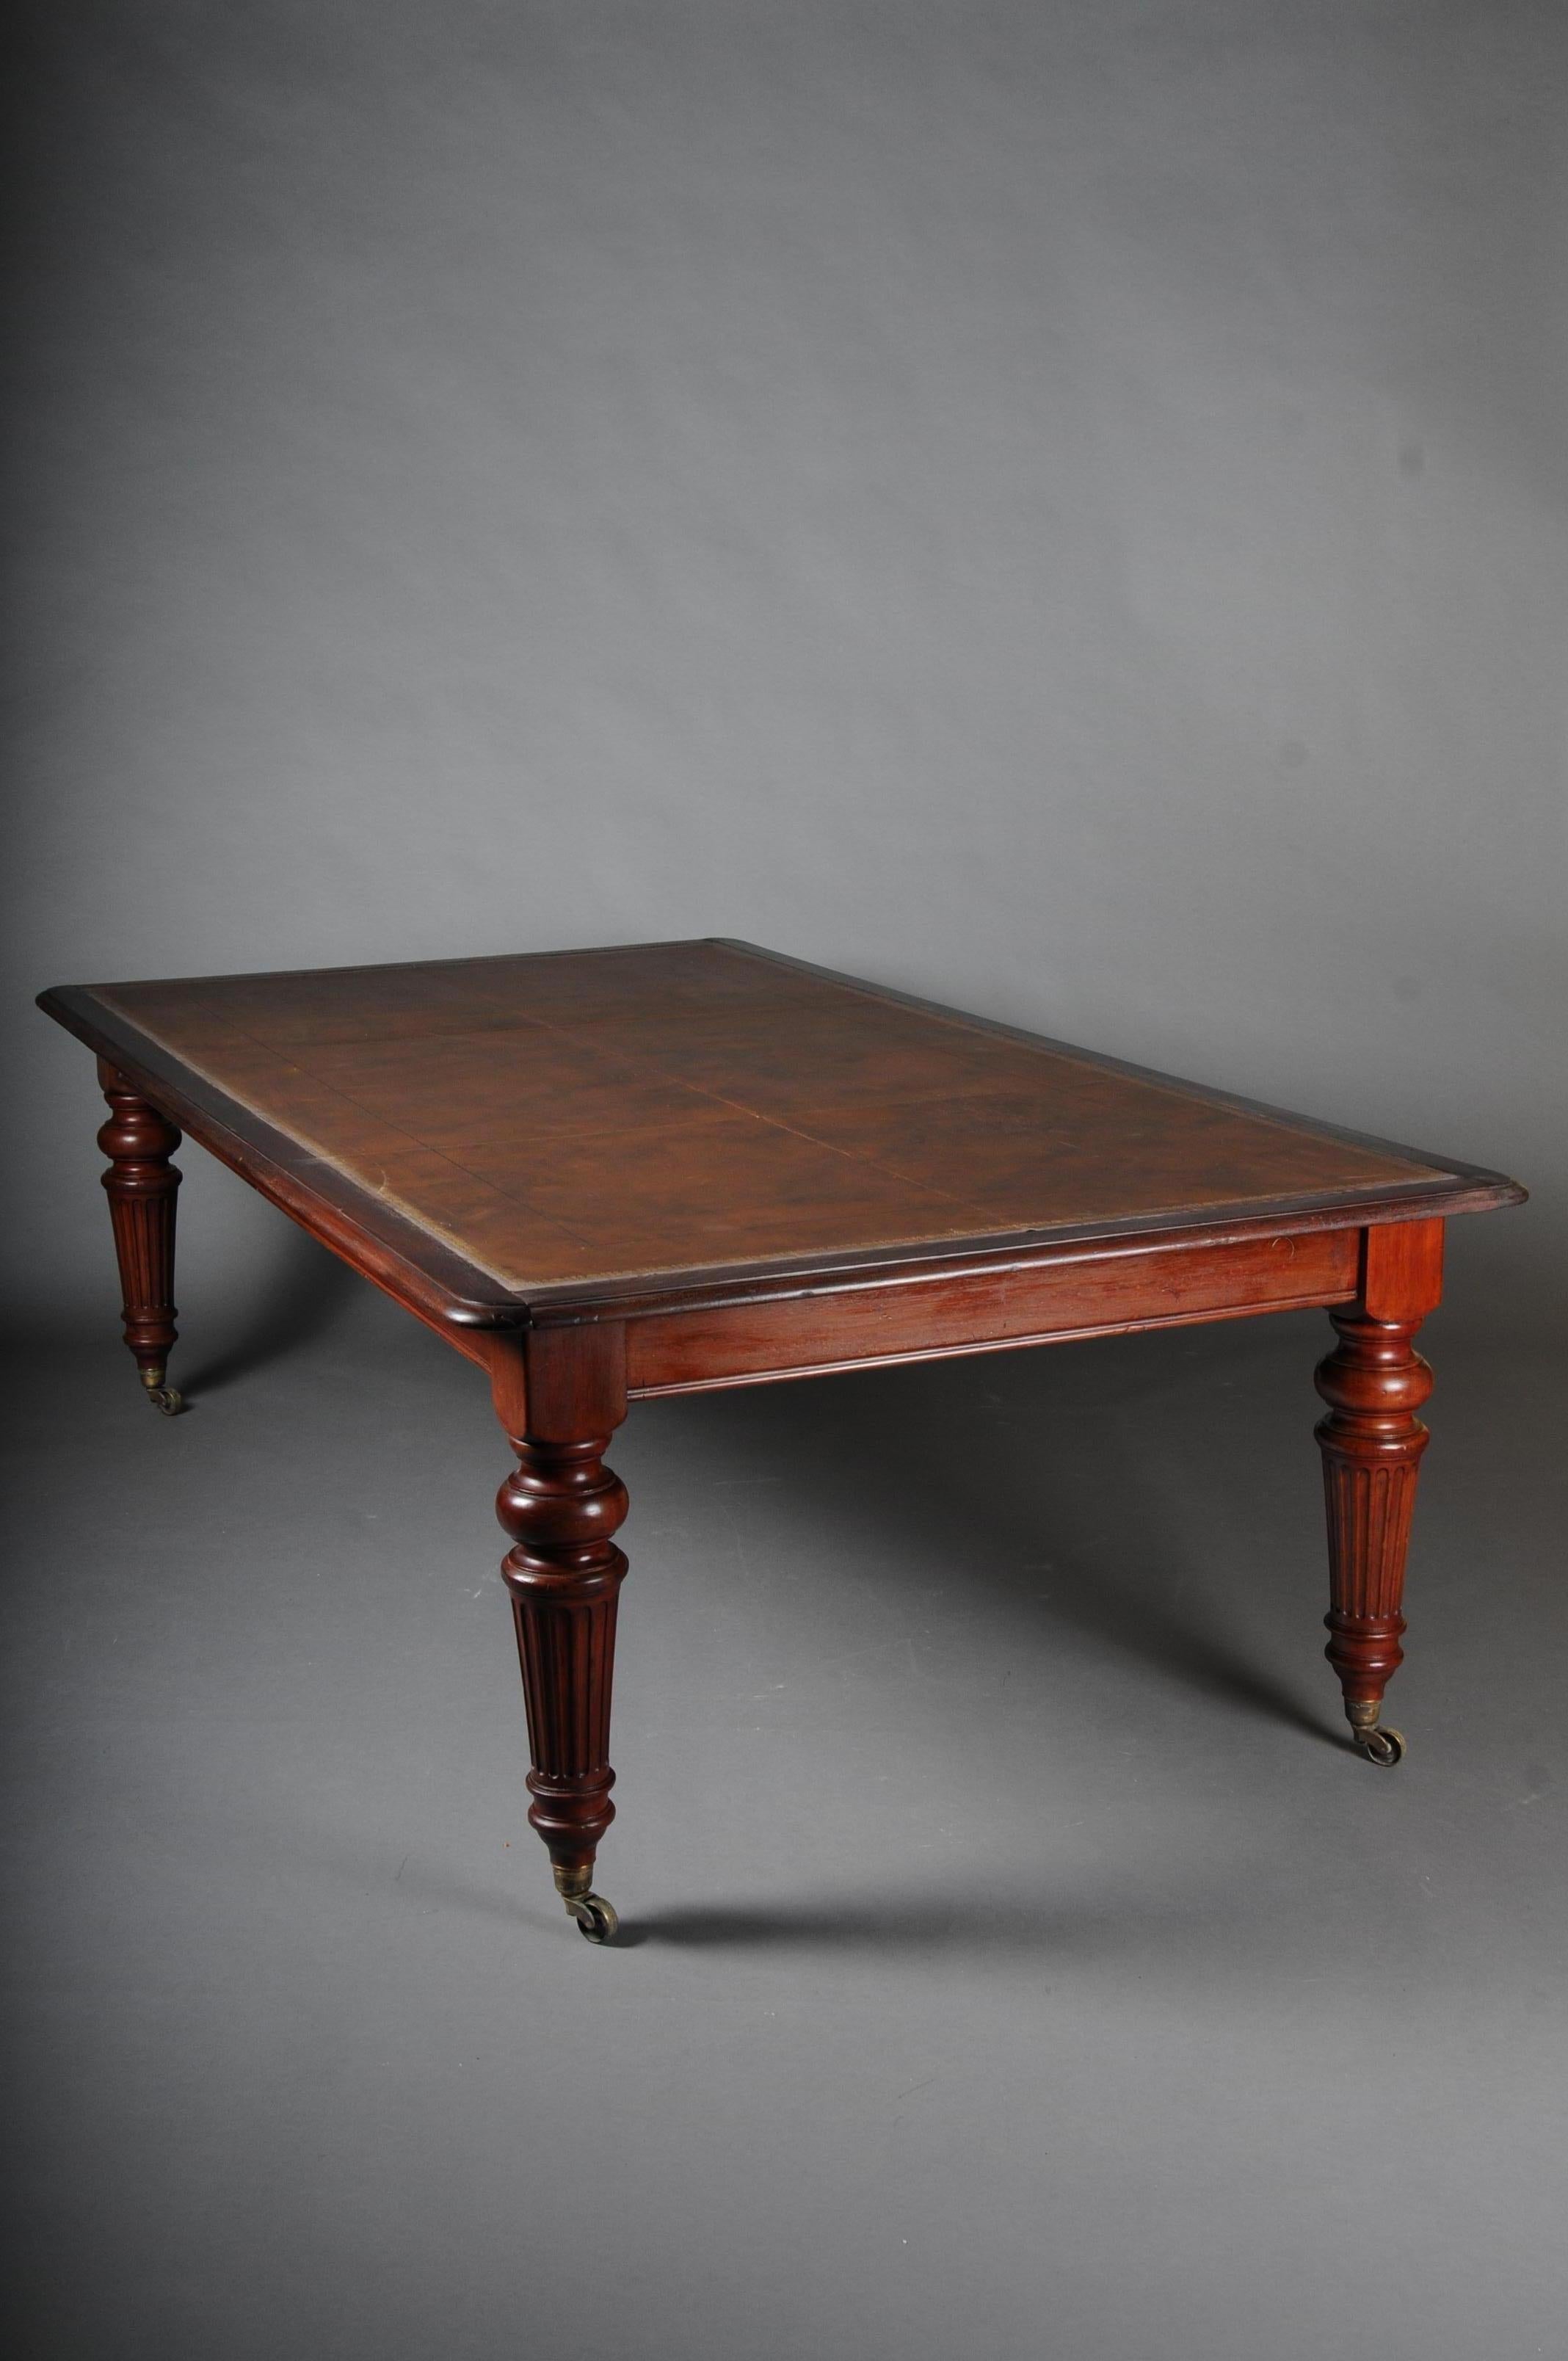 Monumental English table or partner desk or desk, 19th century

England, 19th century
Solid wood with mahogany. Rectangular plate with rounded and protruding wooden frame. Leather tension with embossed gold. Solid baluster legs ending with brass